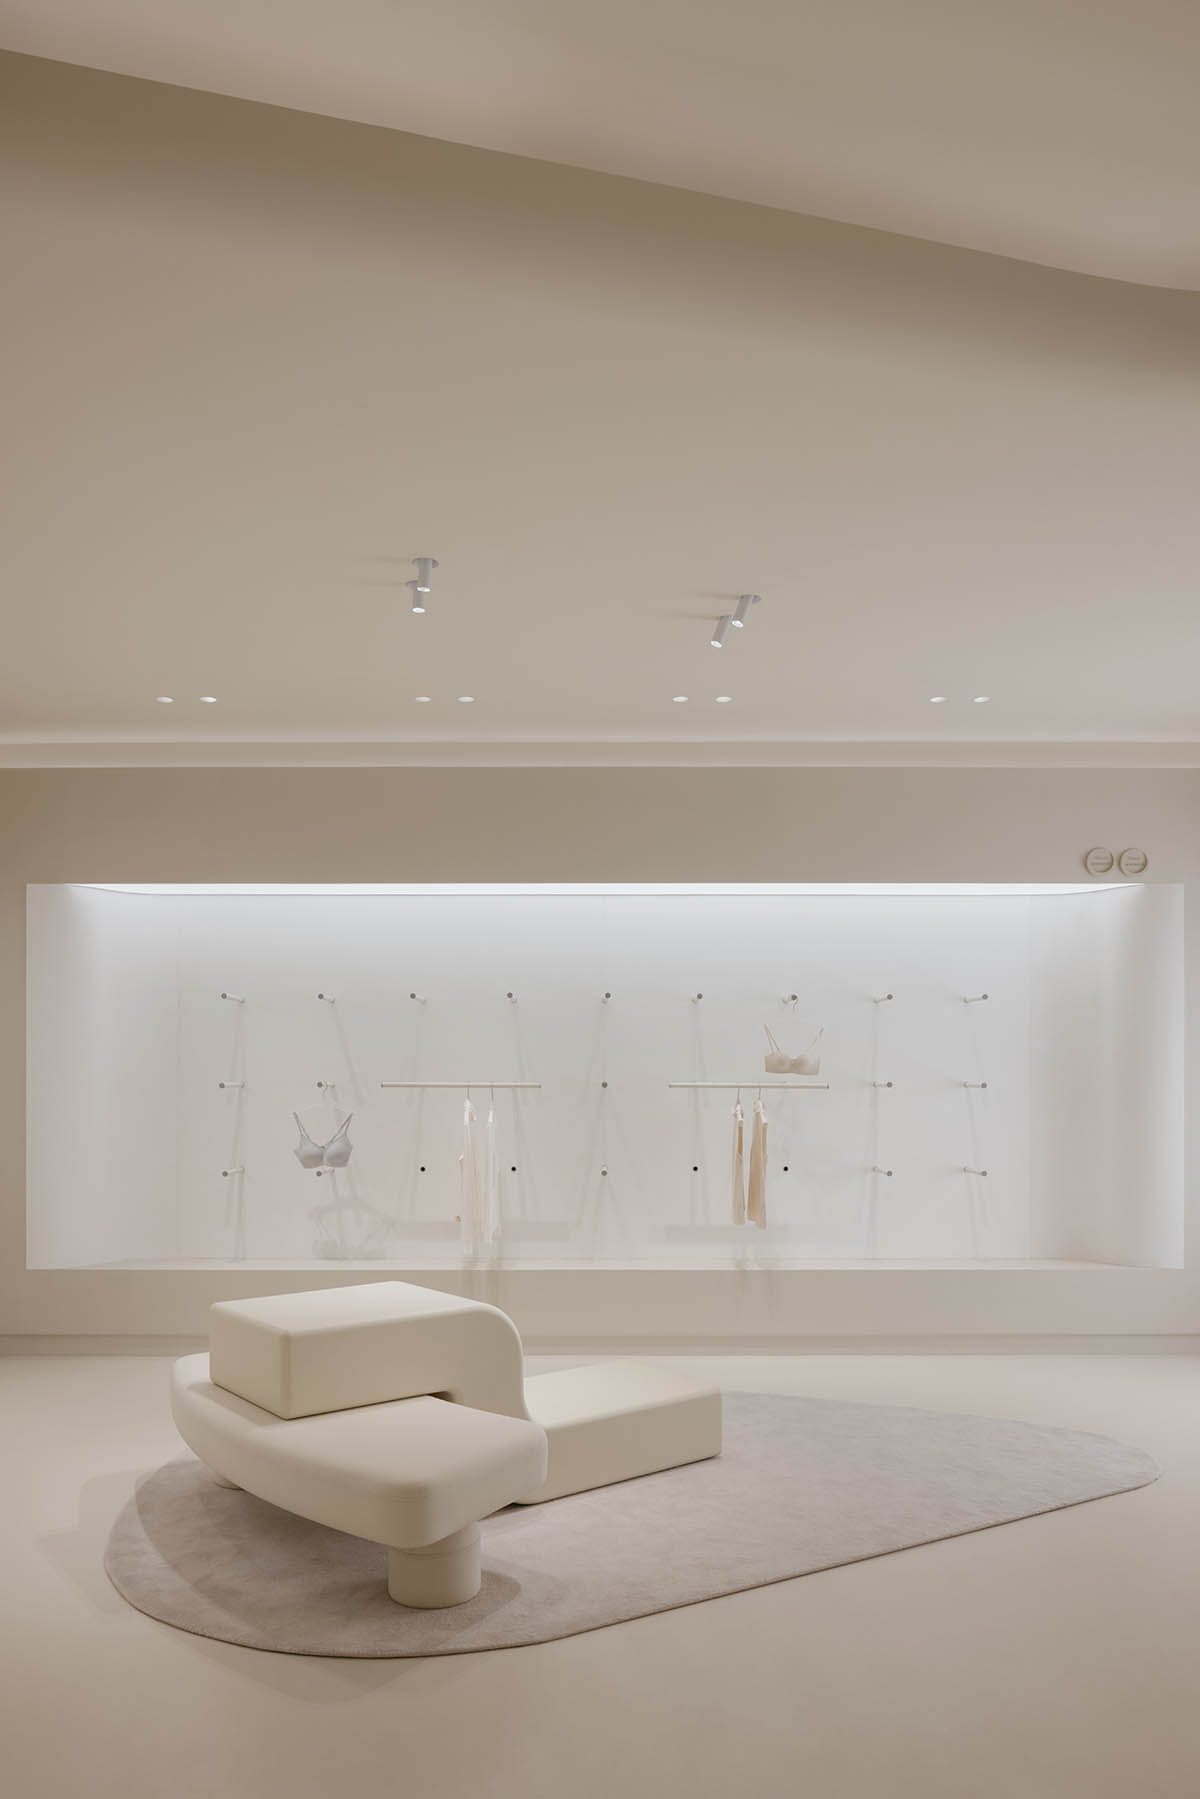 Store interiors by Sò Studio features soft beige tones to give the feeling of 